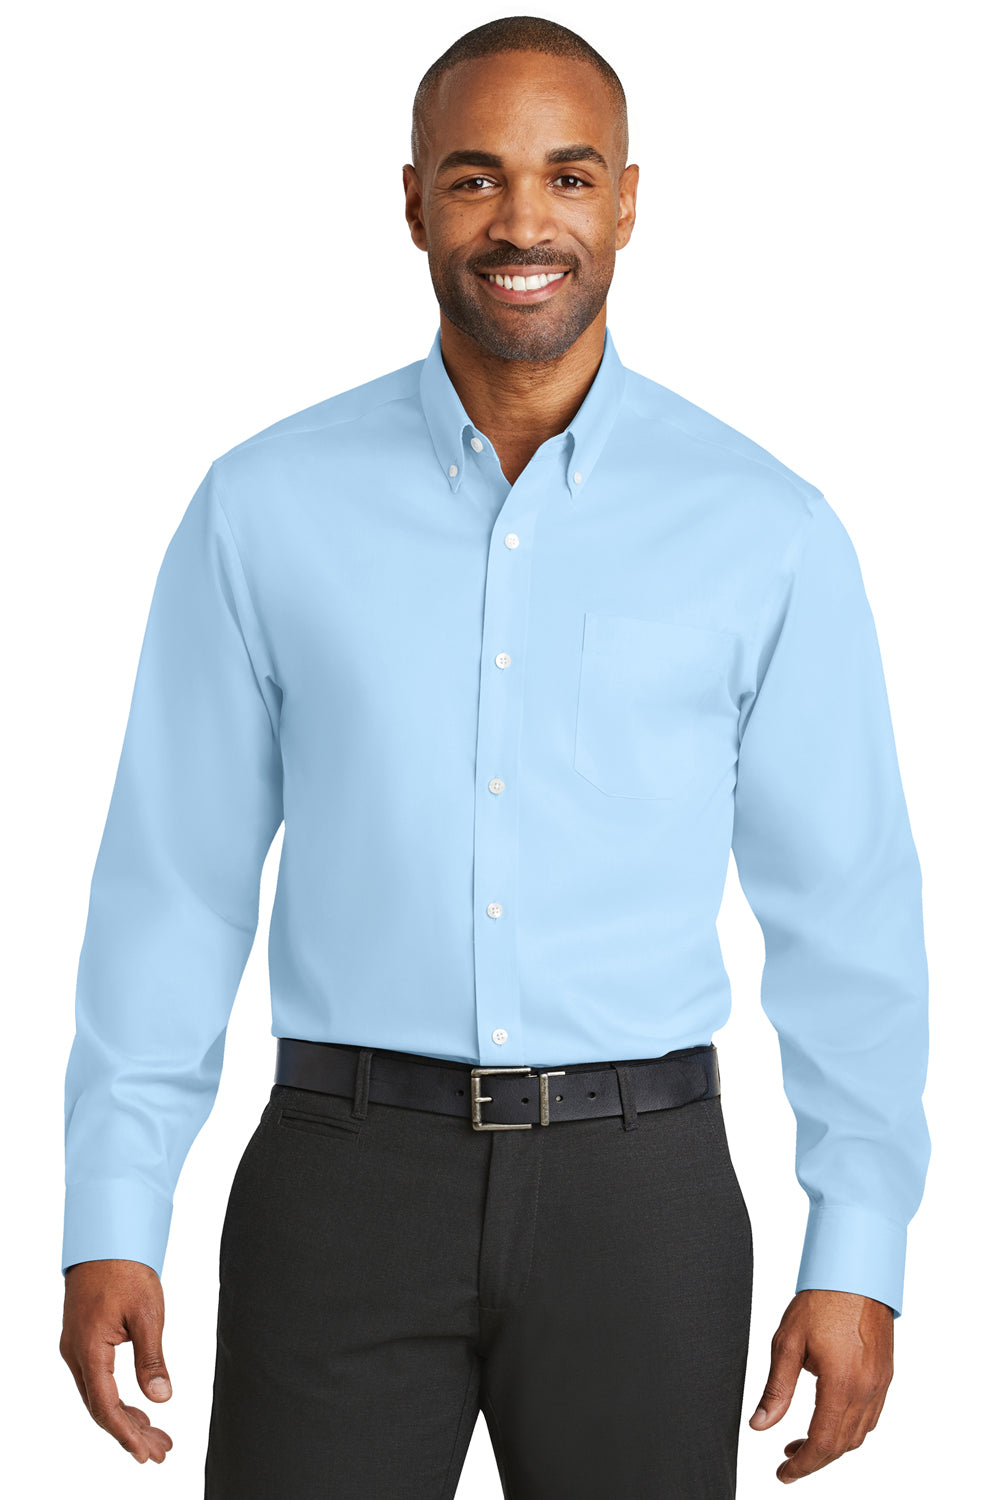 Red House RH78 Mens Wrinkle Resistant Long Sleeve Button Down Shirt w/ Pocket Heritage Blue Front